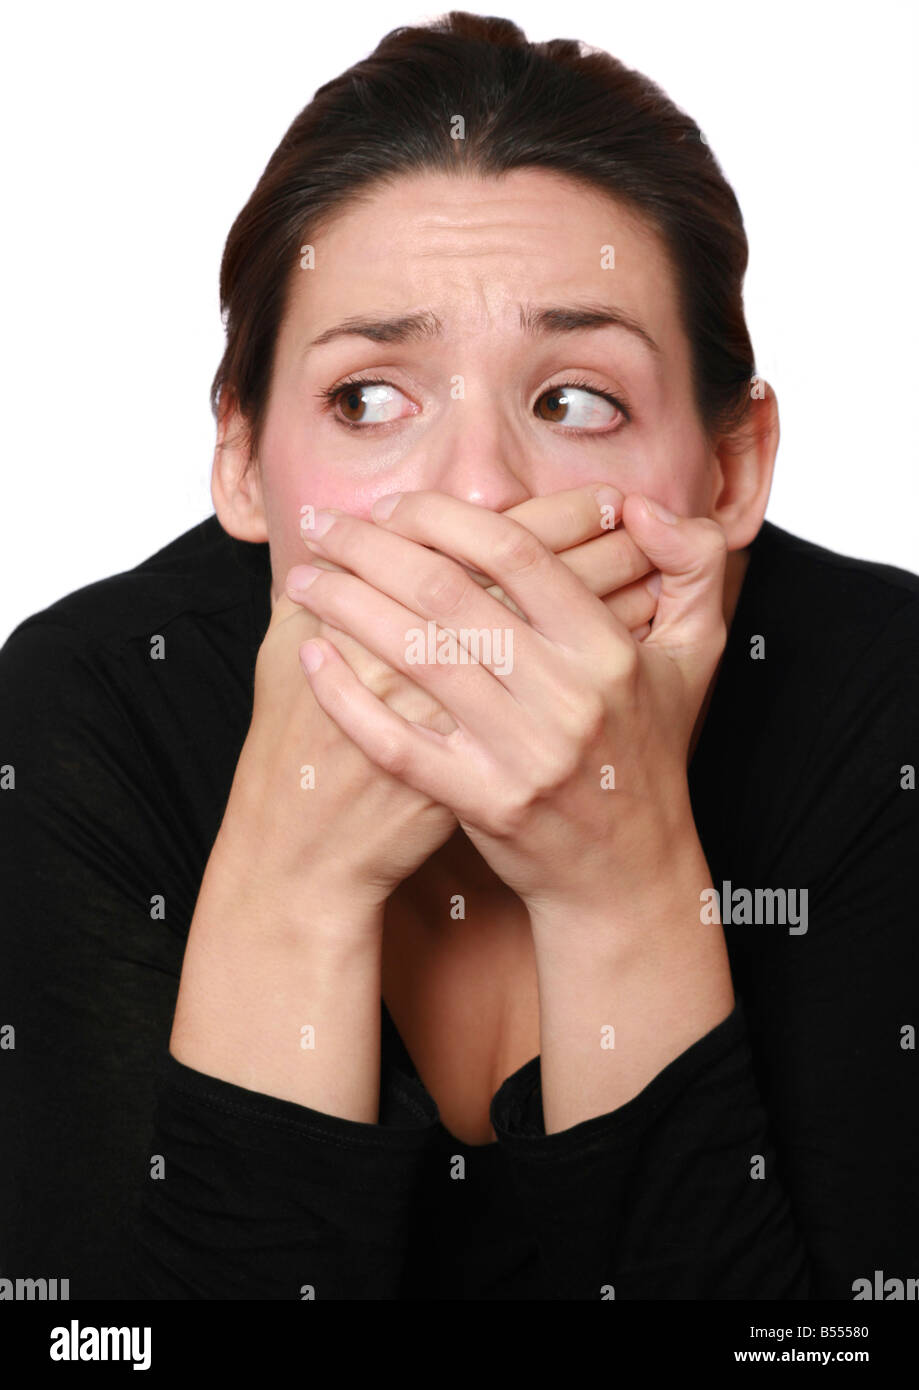 frightened woman covering her mouth with her hands Stock Photo